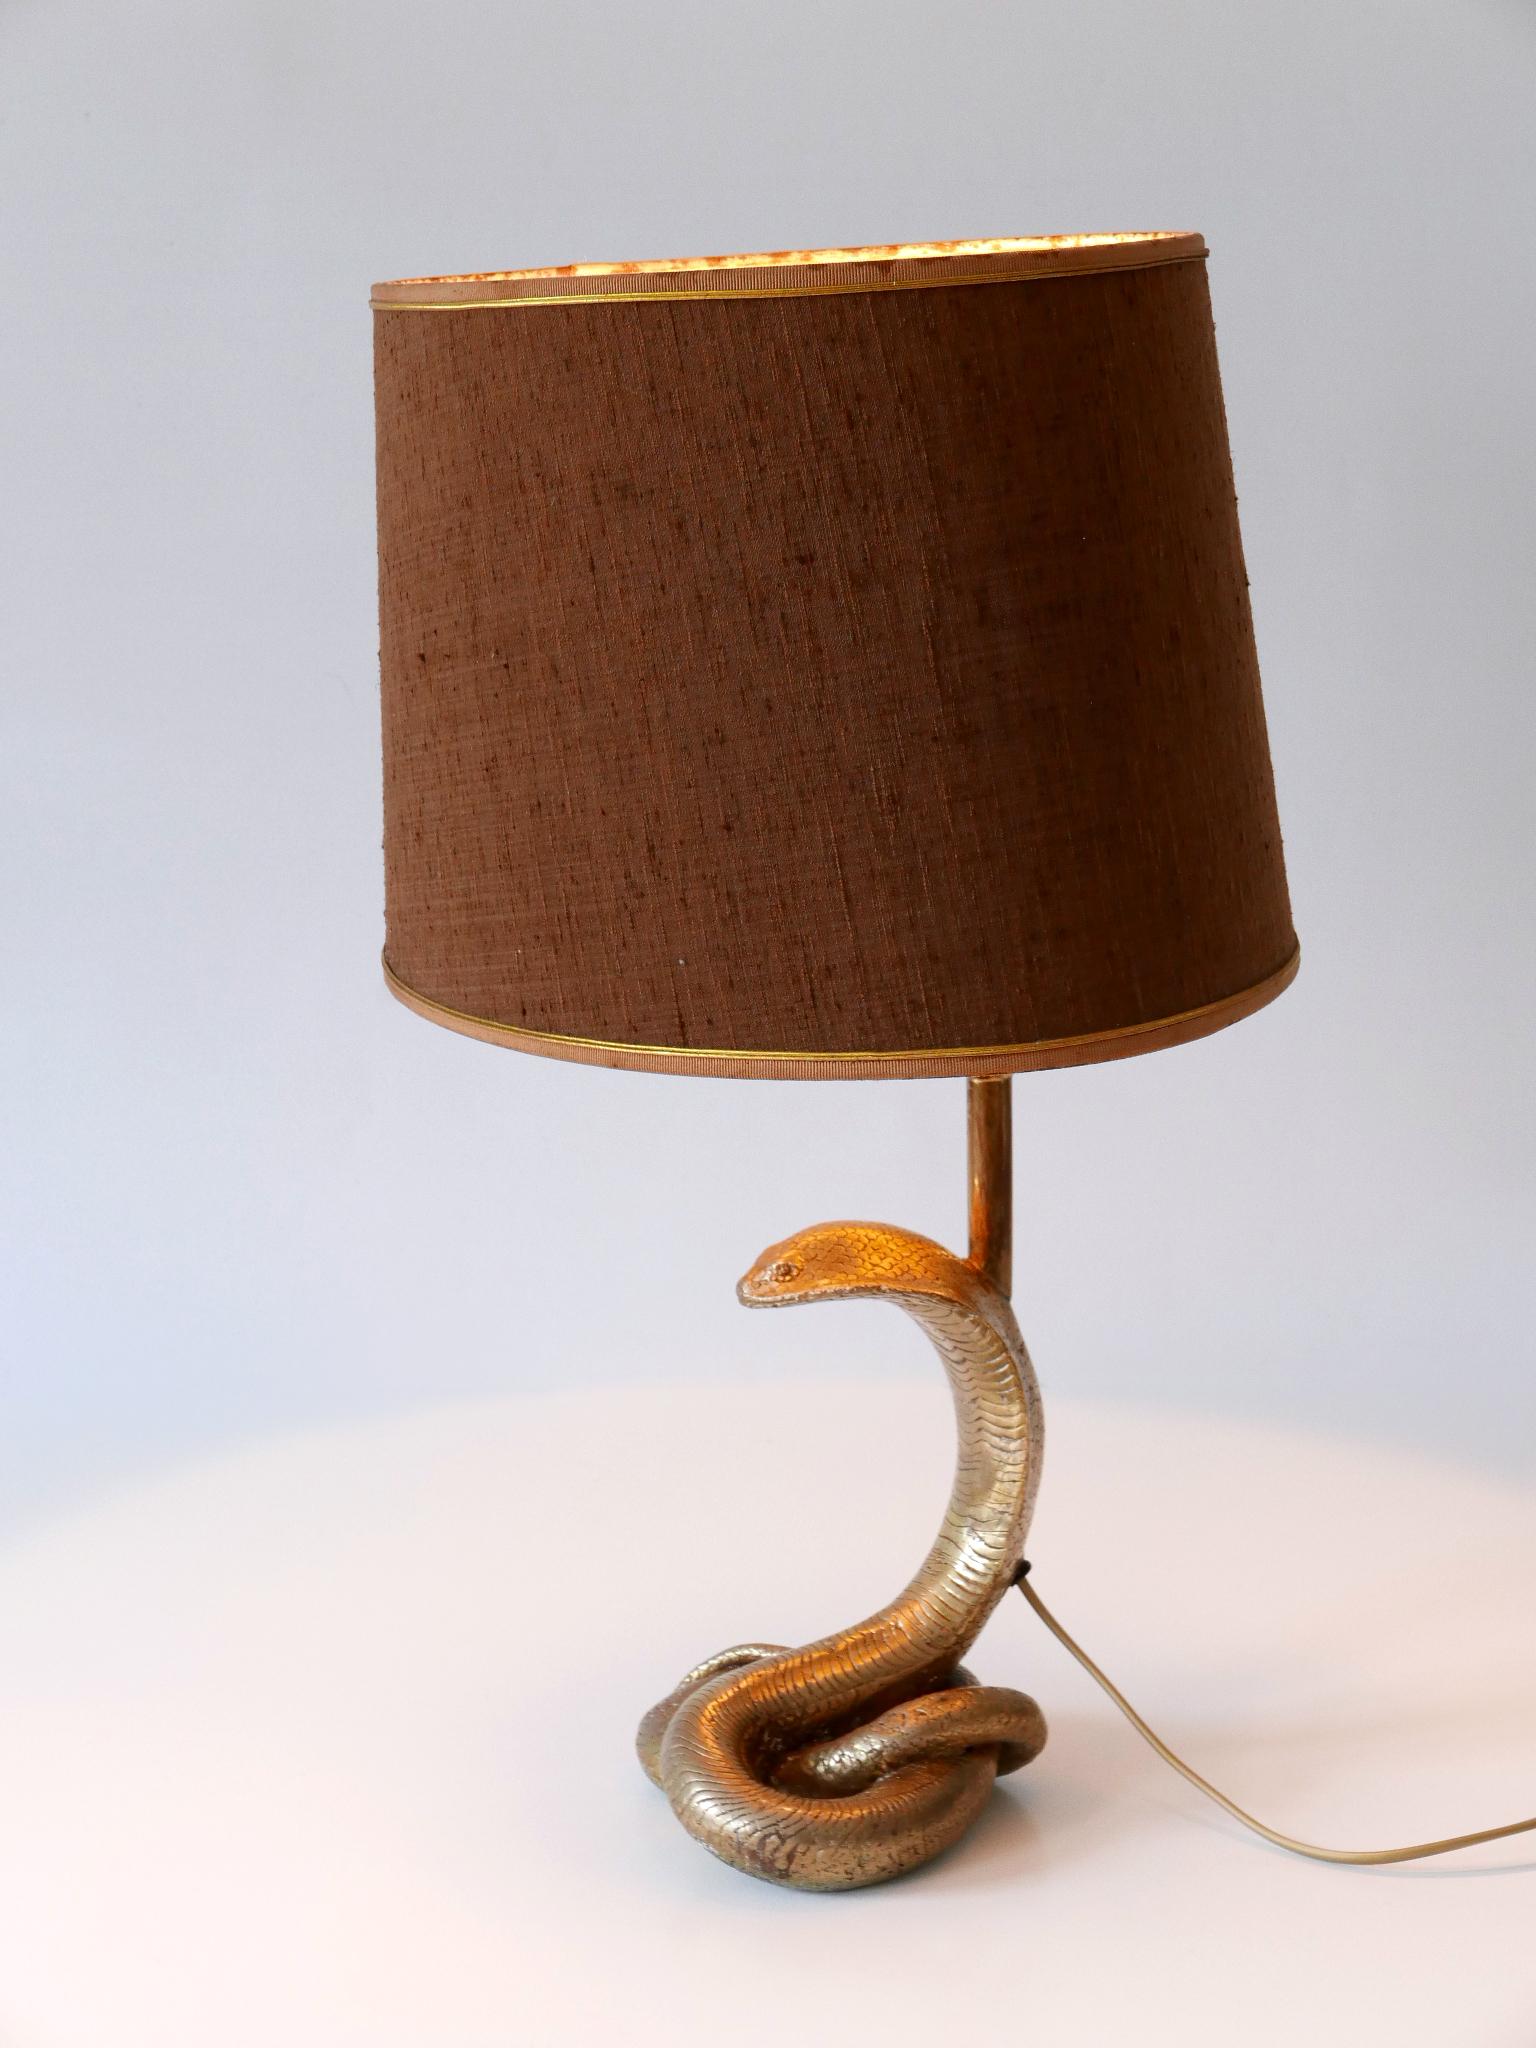 Exceptional Mid-Century Modern Cobra Table Lamp by Maison Jansen France 1970s For Sale 7